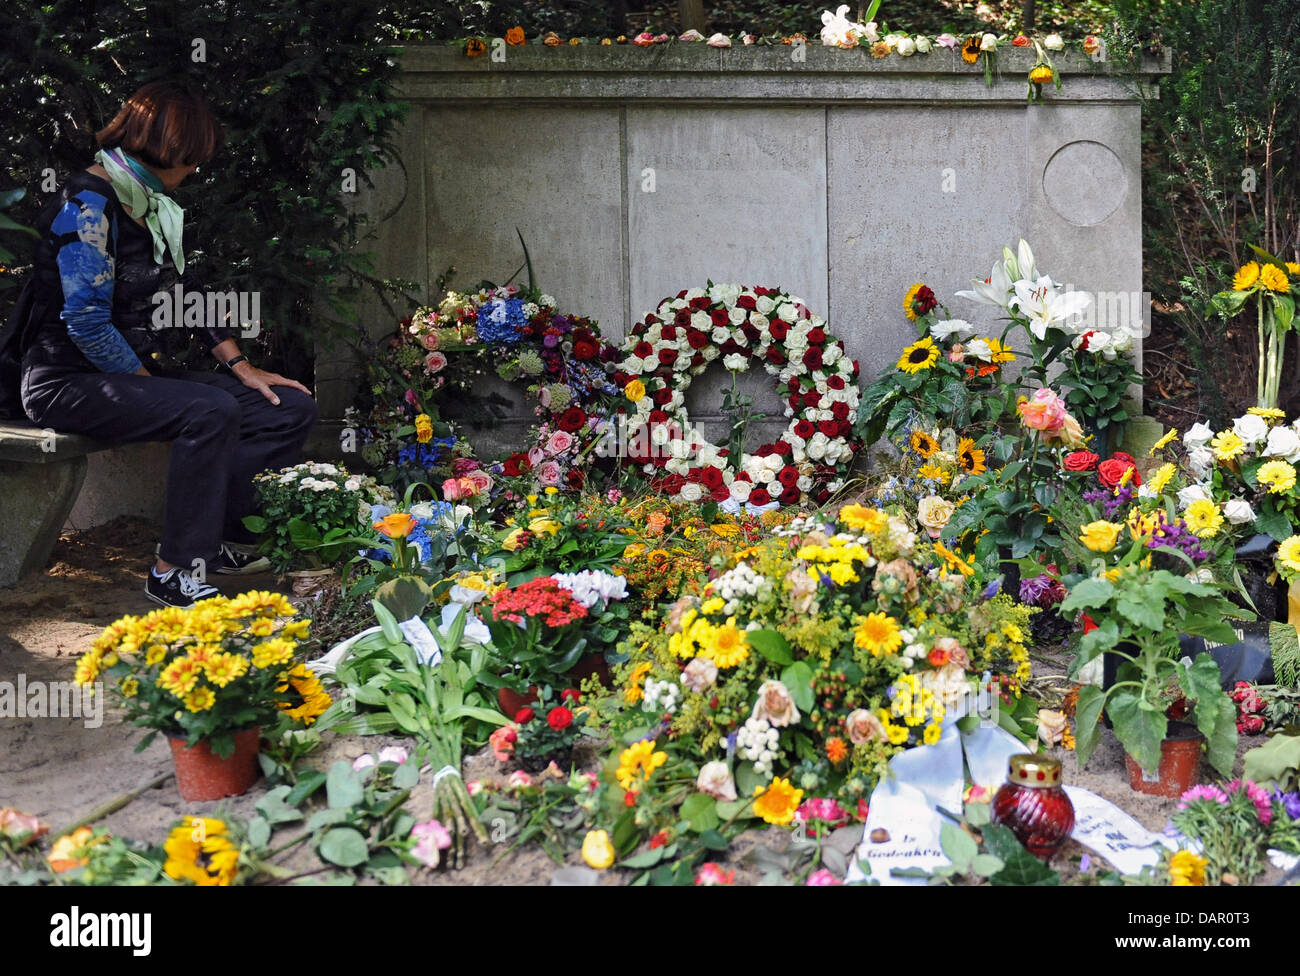 Flowers and floral wreaths lie on the grave of German comedian Vicco von Buelow aka Loriot in Berlin, Germany, 6 September 2011. At the moment, Loriot is the only one to have a grave designed for three to himself. The graveyard on Heerstrasse has about 50 honorary grave sites that are frequently visited by tourists. Photo: Britta Pedersen Stock Photo